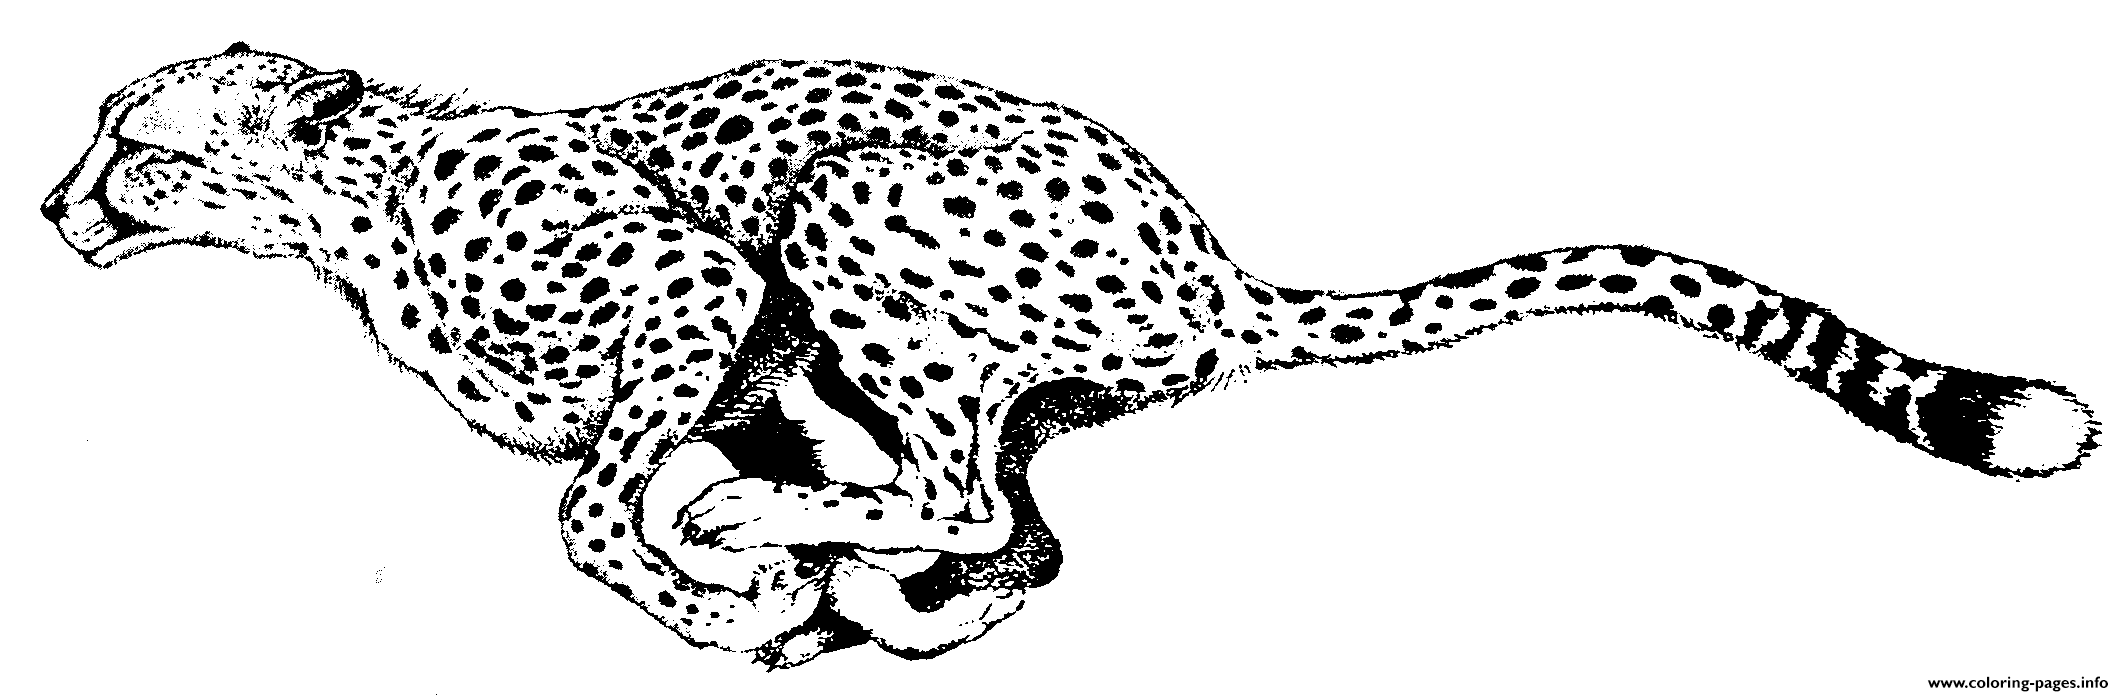 Coloring Pages Of A Cheetah Animalbe05 coloring